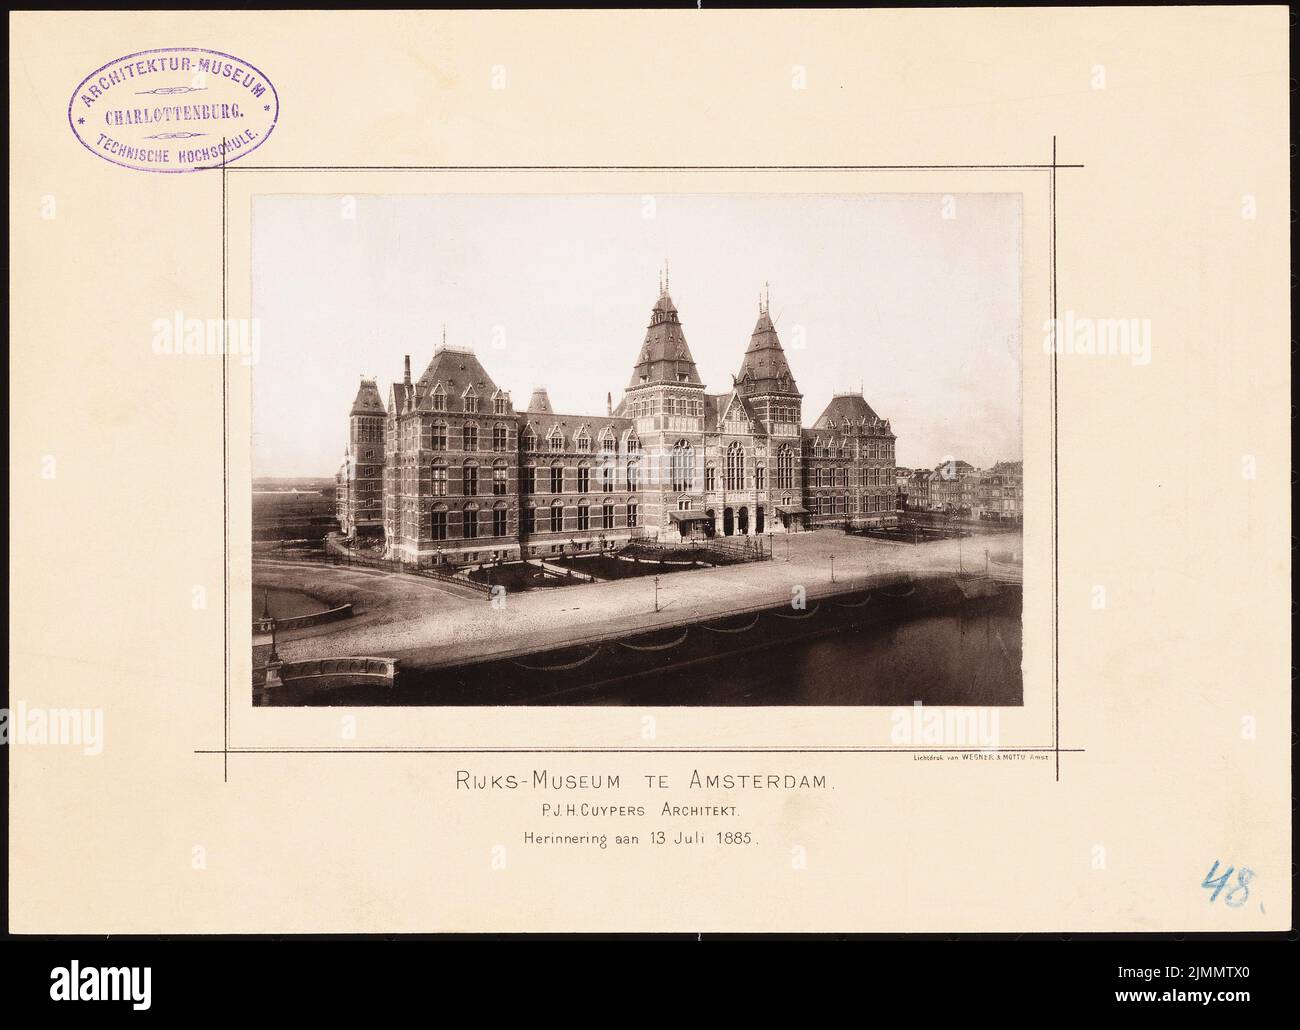 Cuypers P. J. H. (1827-1921), Reichsmuseum, Amsterdam (July 13, 1885): View of the entrance side. Photo on paper, 20.1 x 27.8 cm (including scan edges) Stock Photo